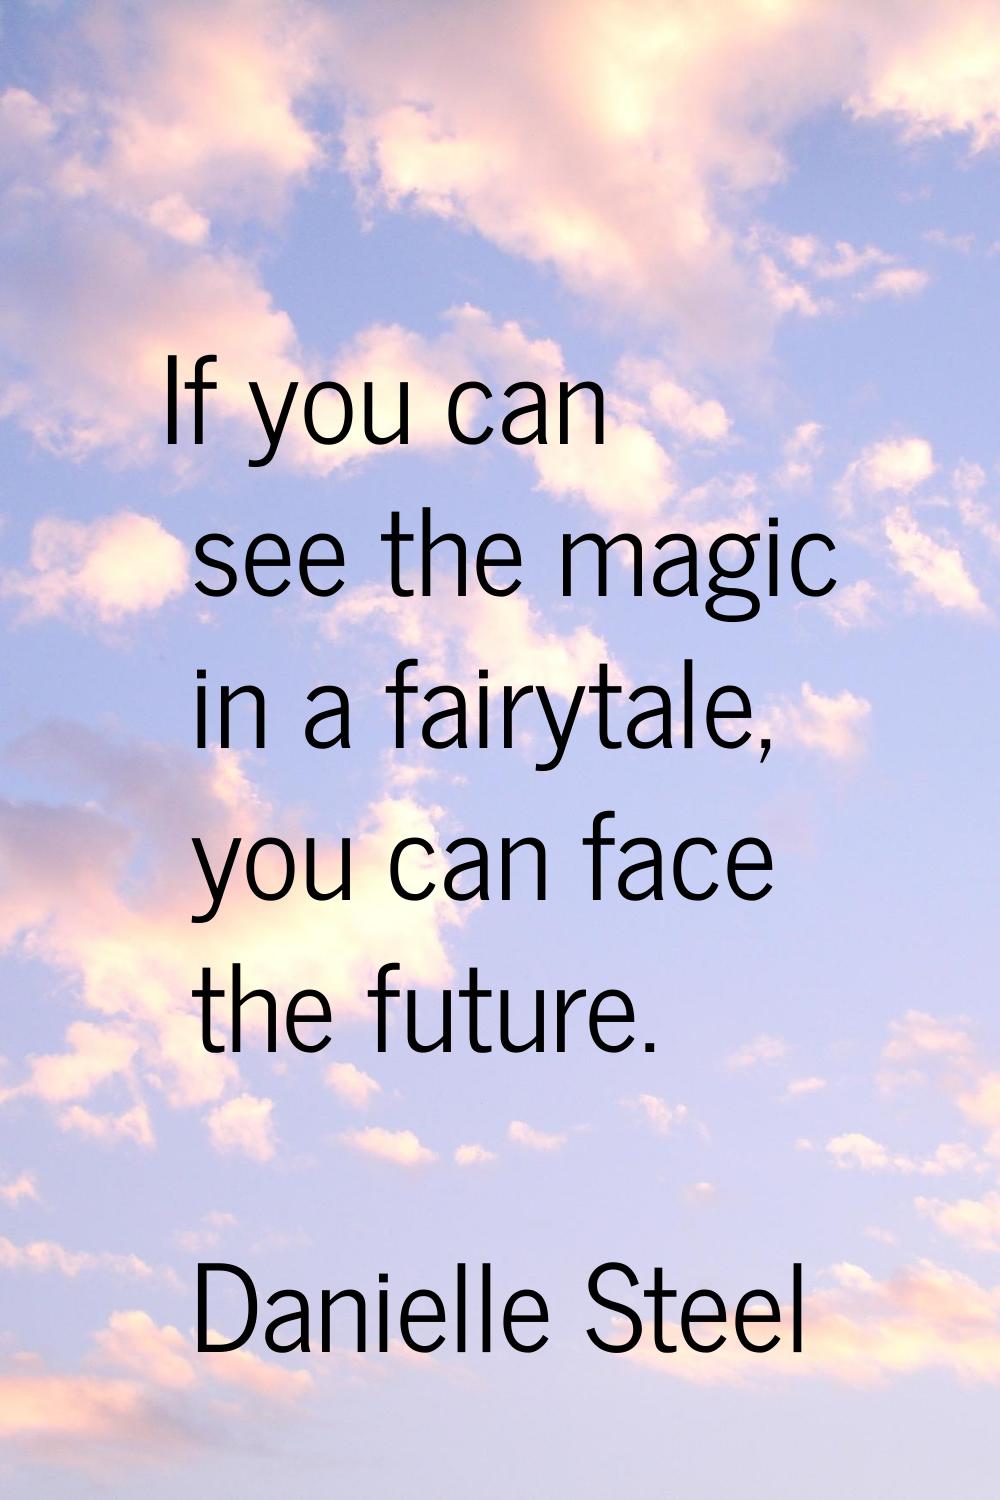 If you can see the magic in a fairytale, you can face the future.